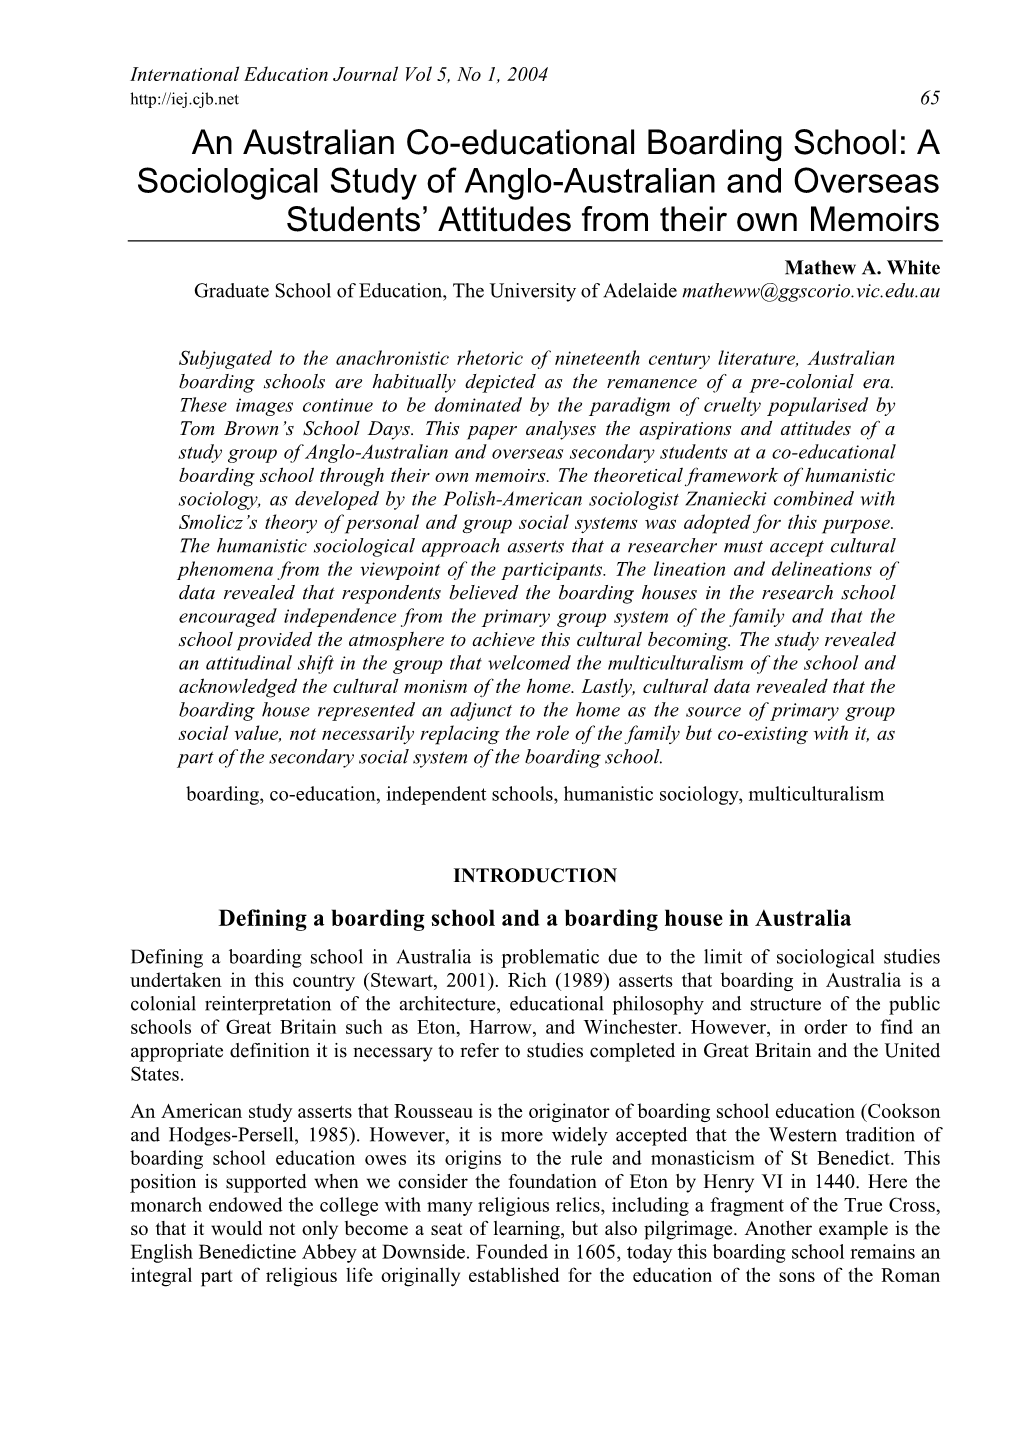 An Australian Co-Educational Boarding School: a Sociological Study of Anglo-Australian and Overseas Students’ Attitudes from Their Own Memoirs Mathew A